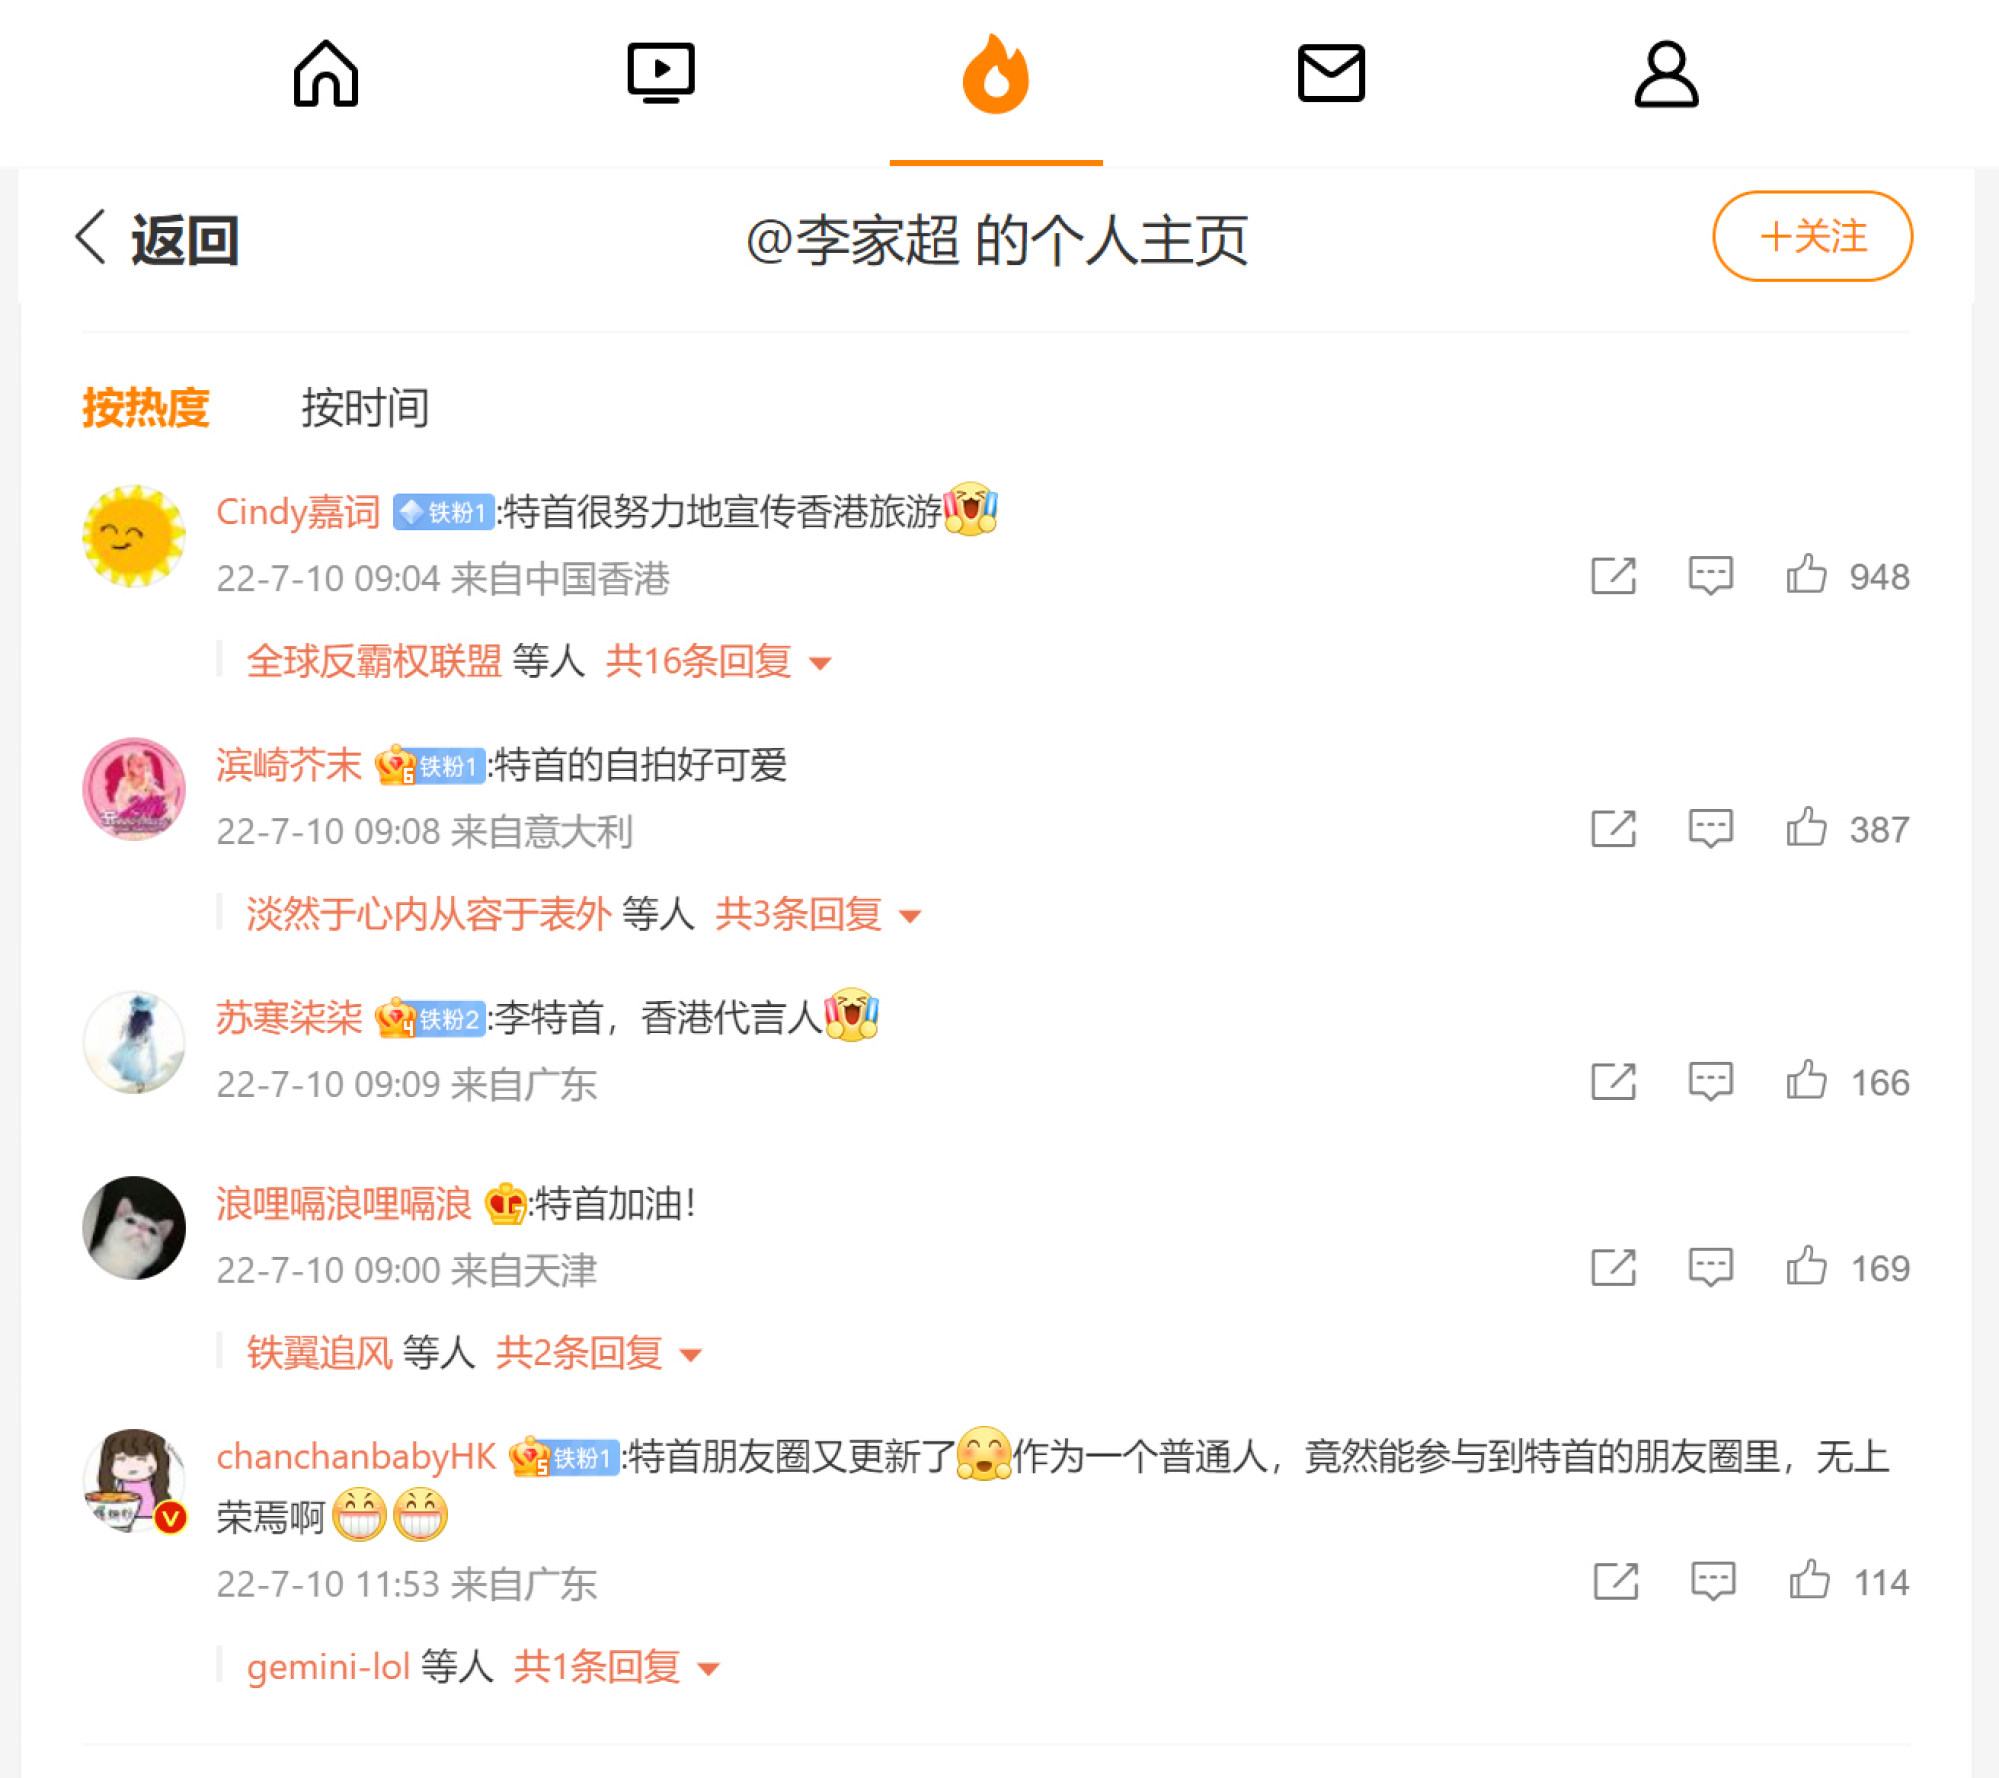 A screenshot showing comments on John Lee’s Weibo. Photo: Weibo